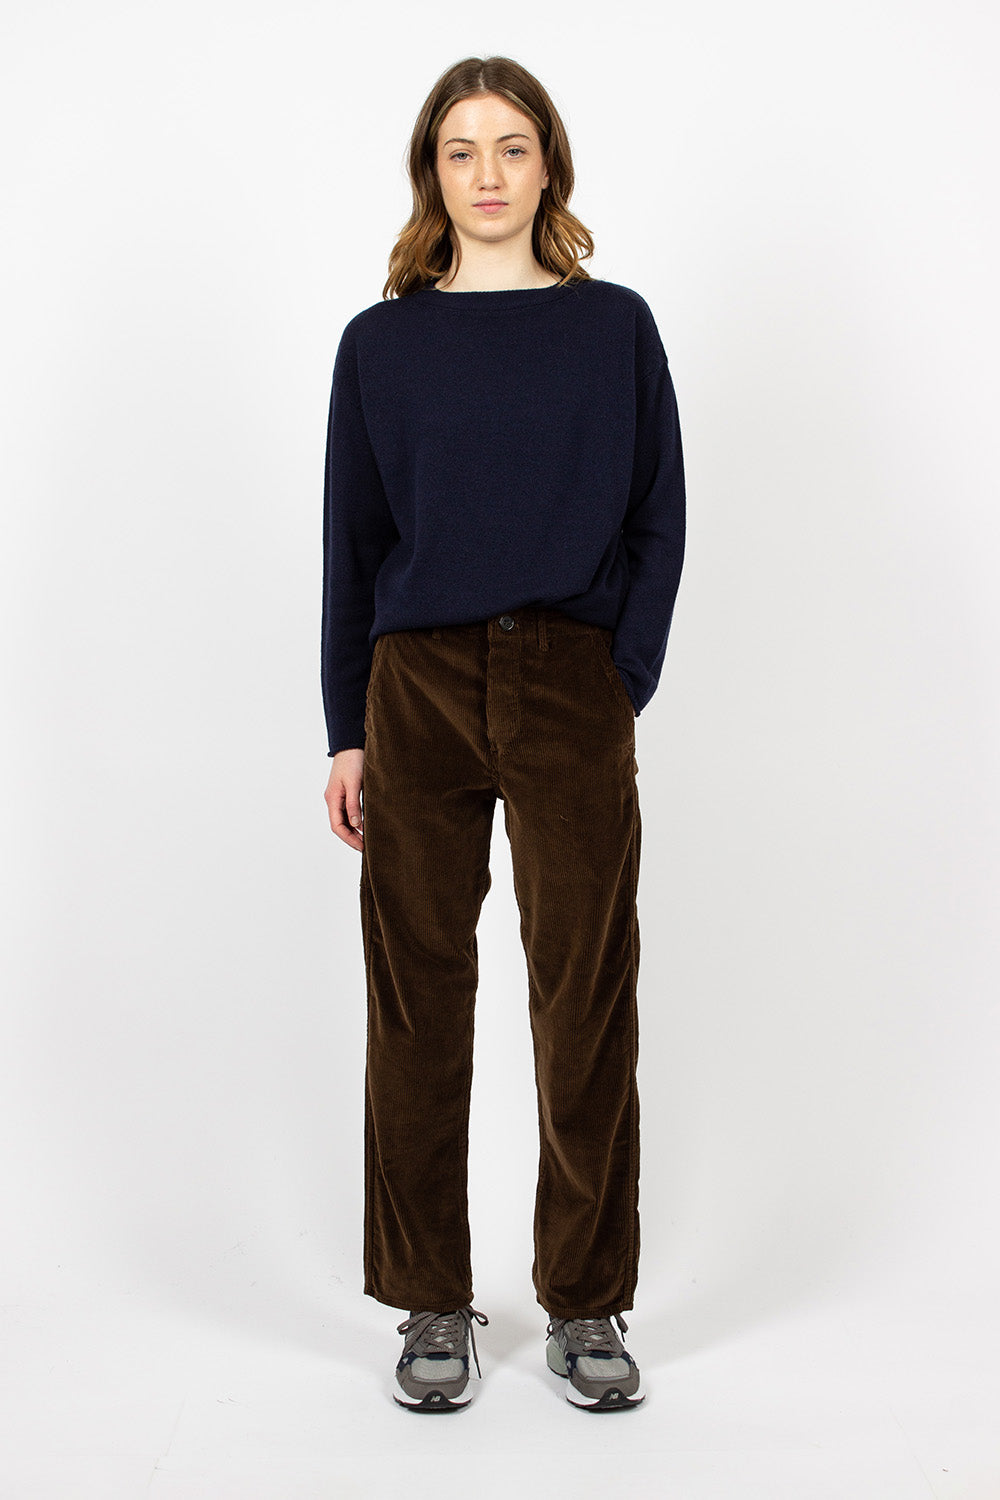 Buy Hiltl Brown Formal Trousers Online  419289  The Collective